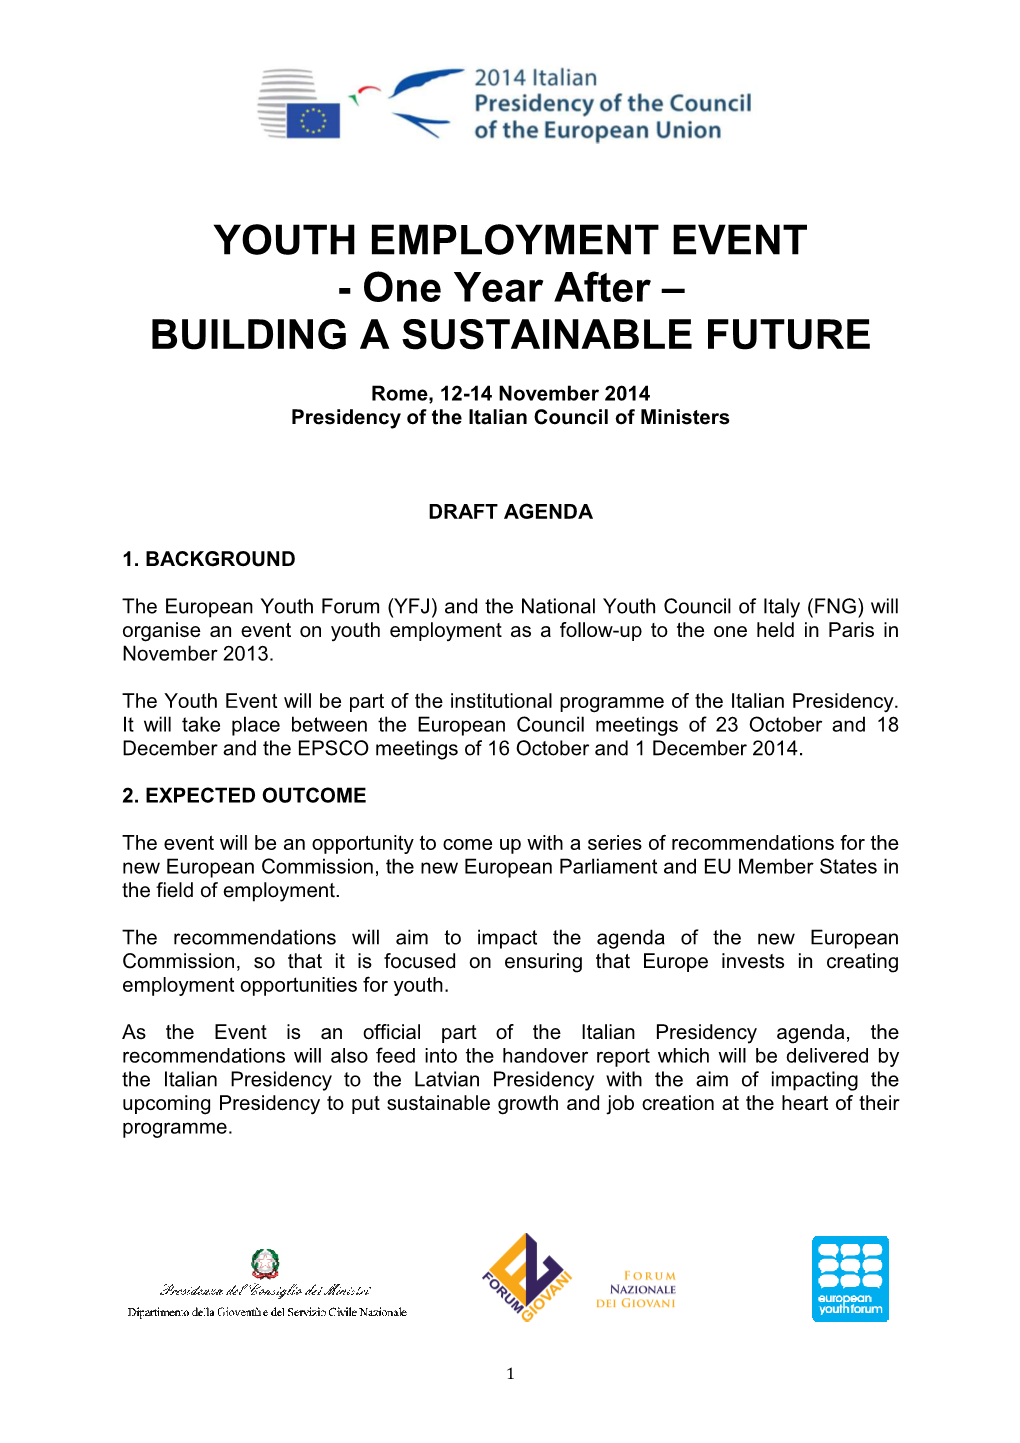 YOUTH EMPLOYMENT EVENT - One Year After – BUILDING a SUSTAINABLE FUTURE